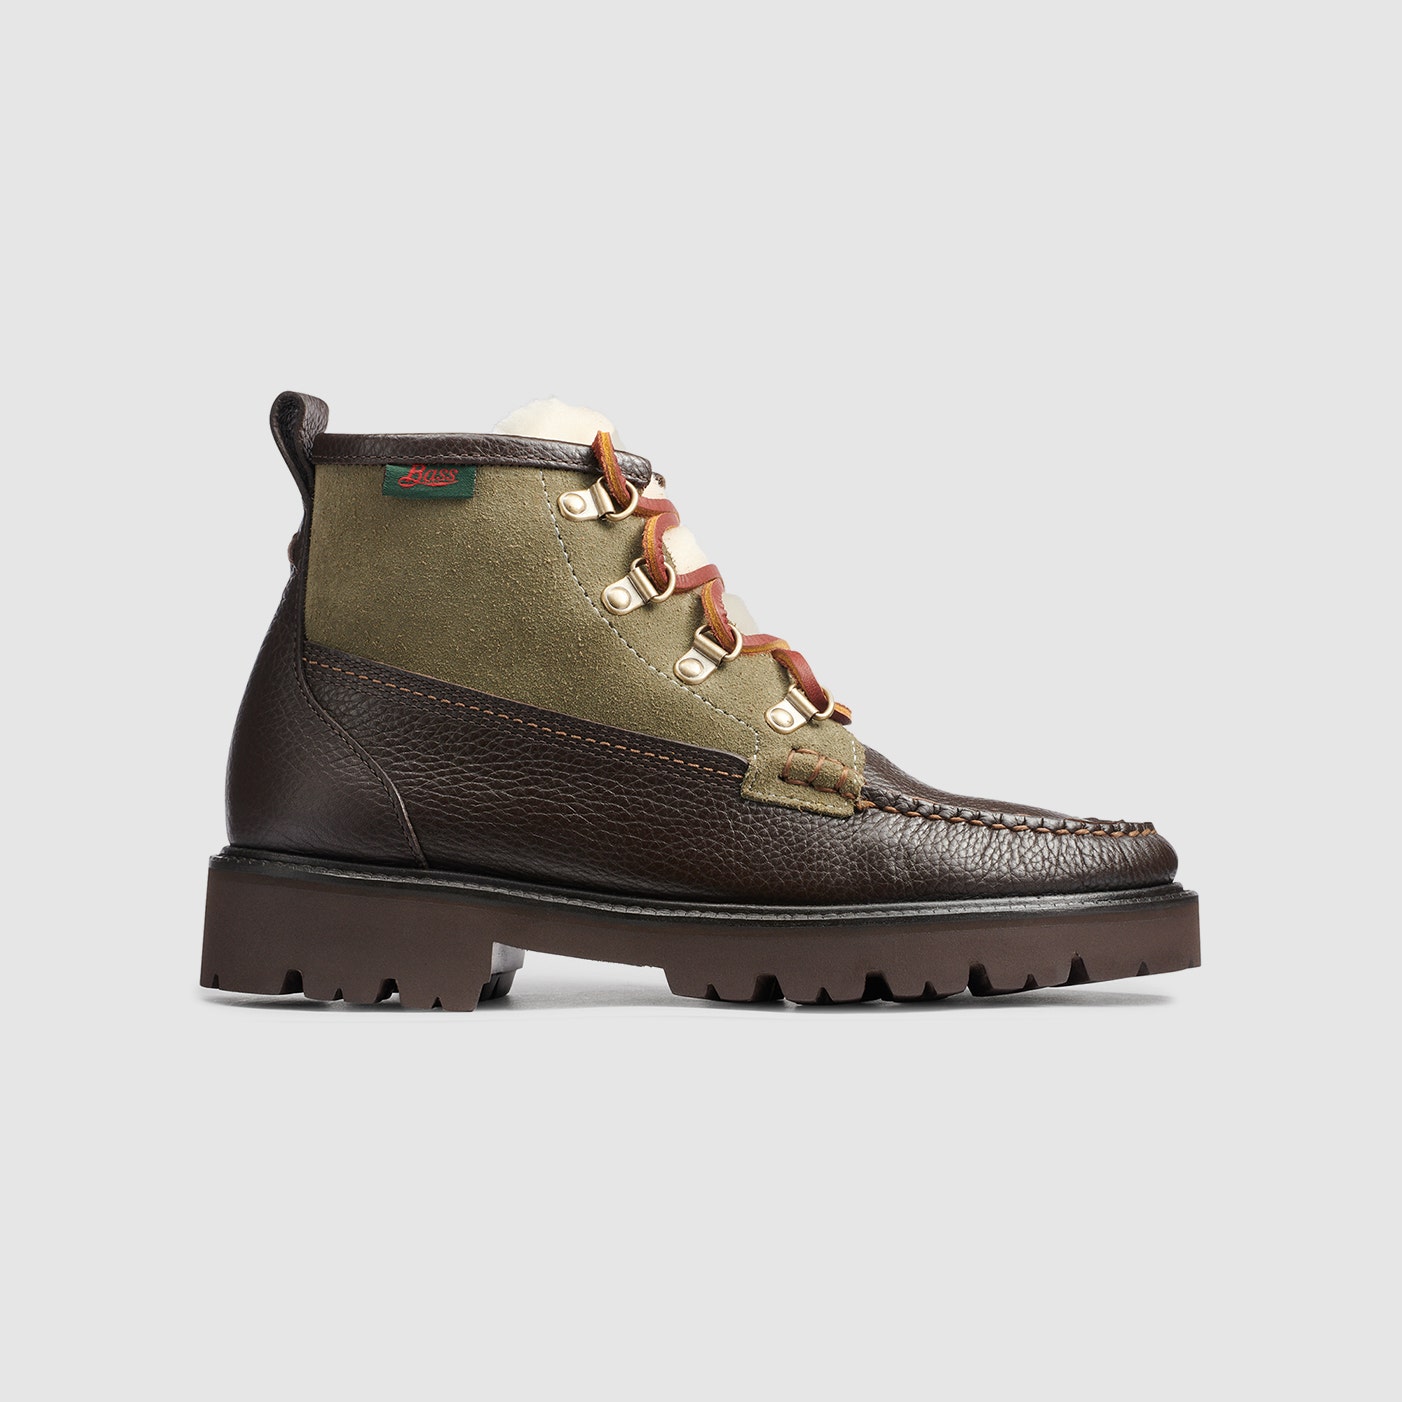 Image of G.H.BASS | Women's Mixed Media Ranger Super Lug Boot With Shearling | Black/Olive | Size 6.5